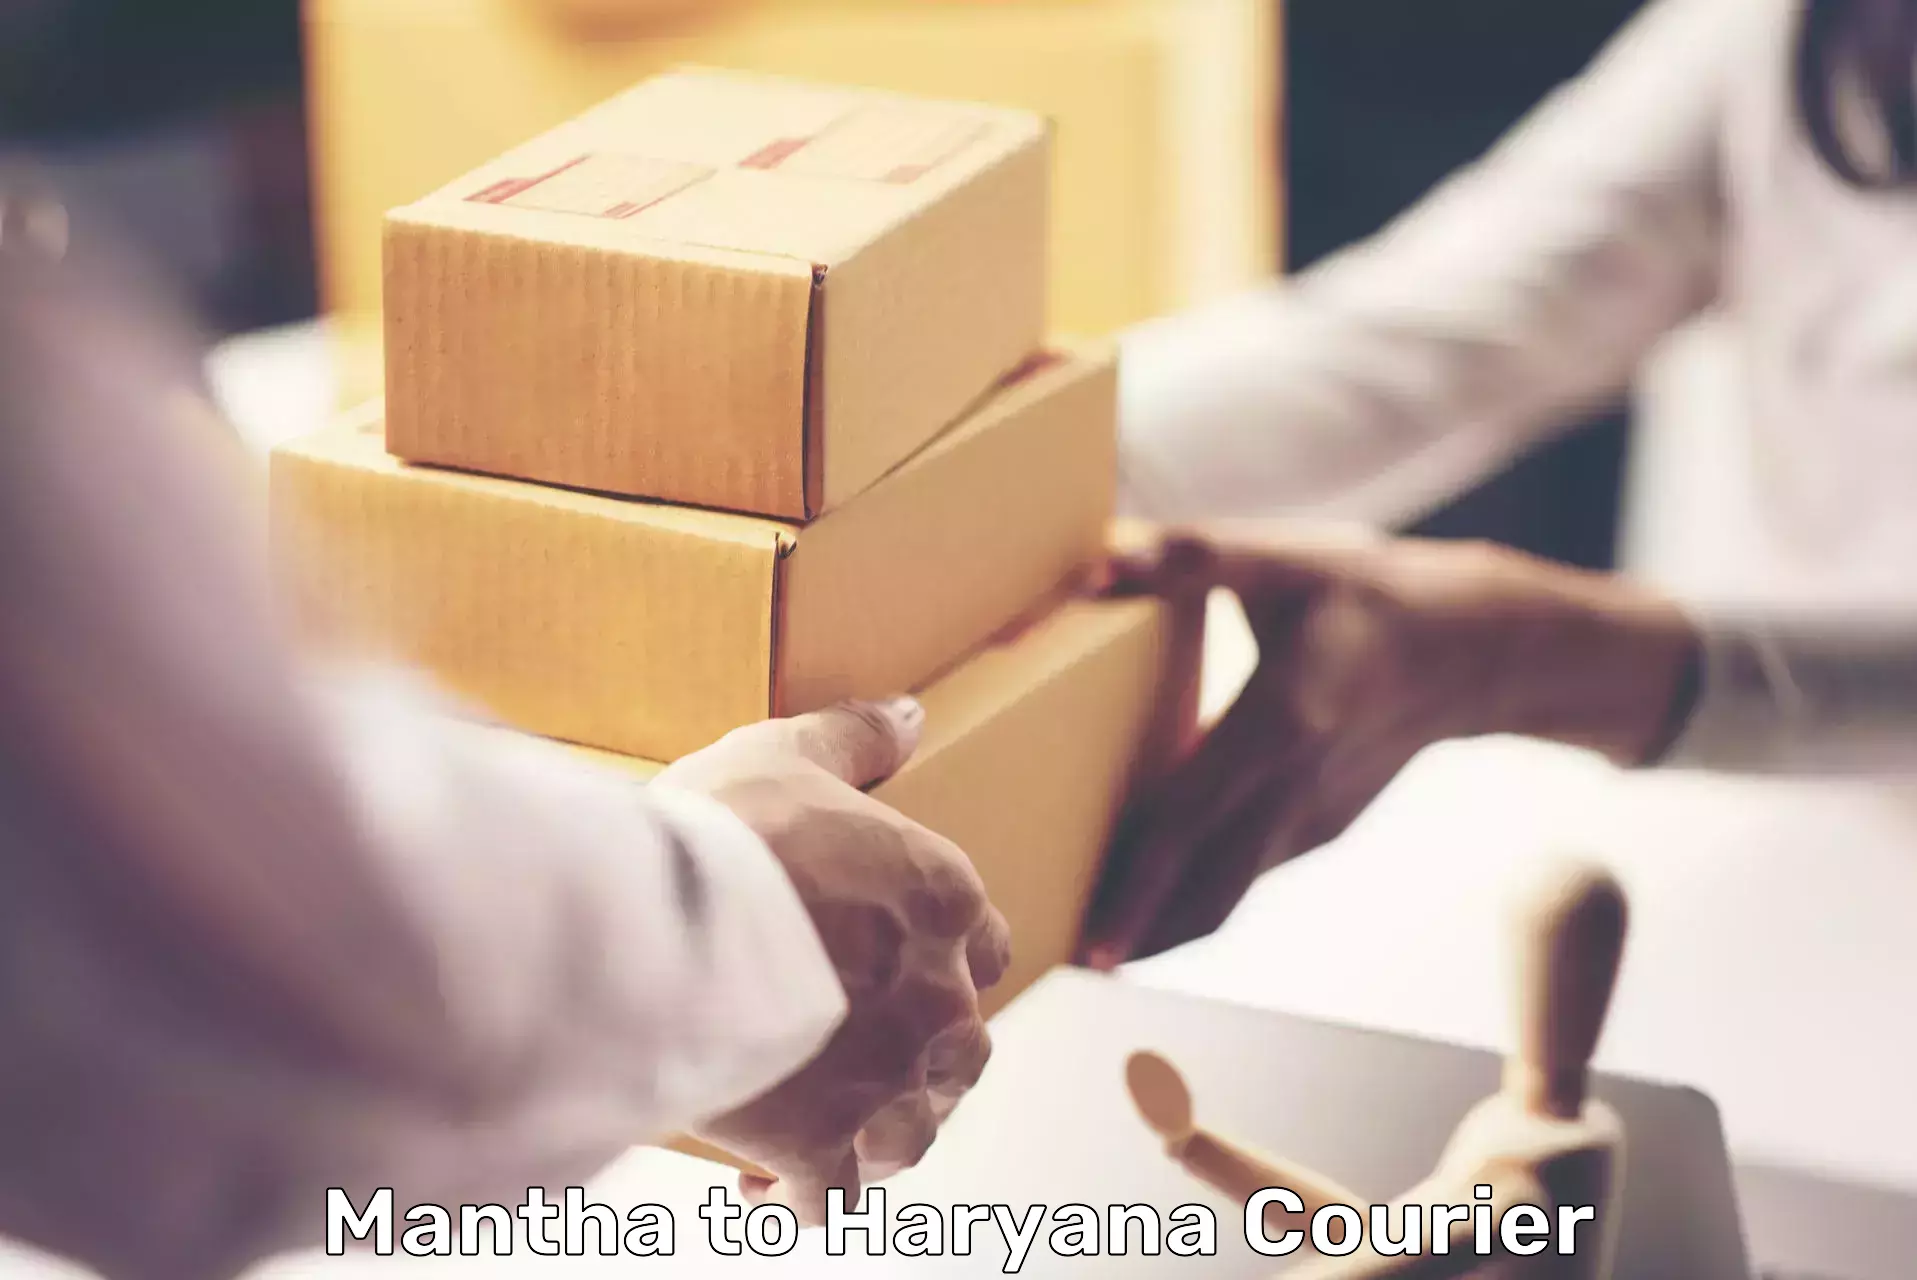 Specialized shipment handling Mantha to Haryana